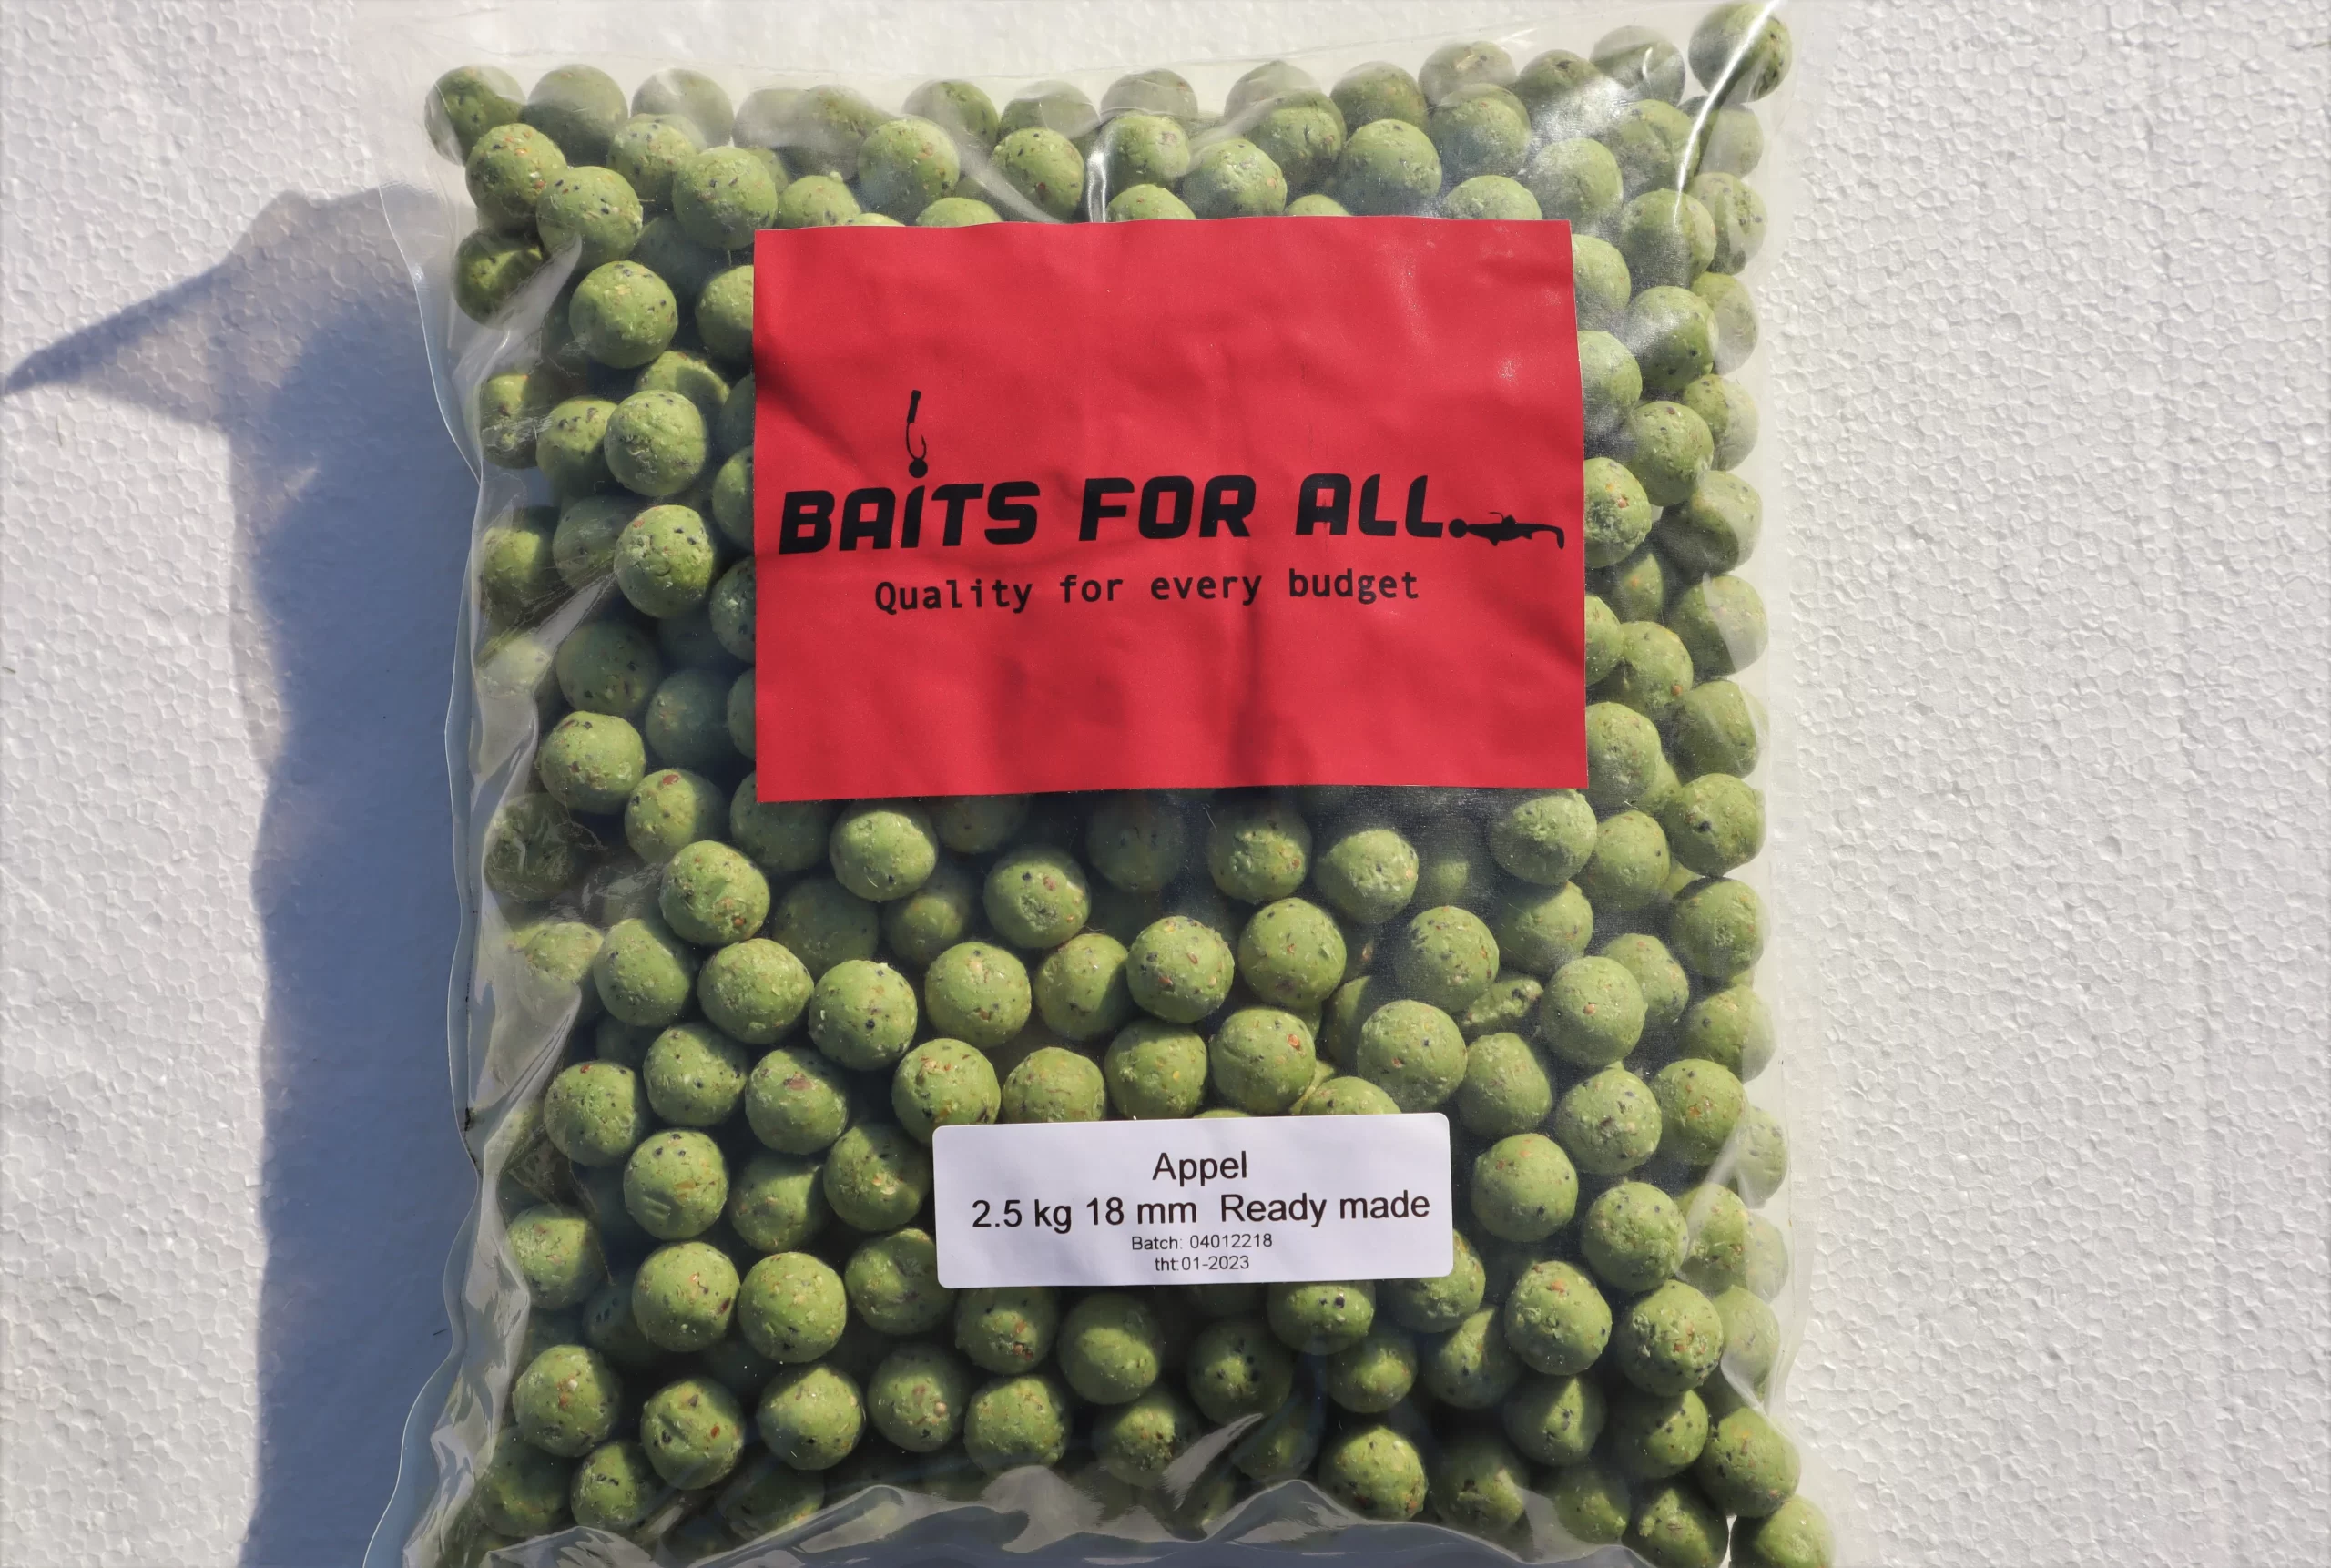 Trend kip pil Appel kaneel boilies readymades - Baits for all